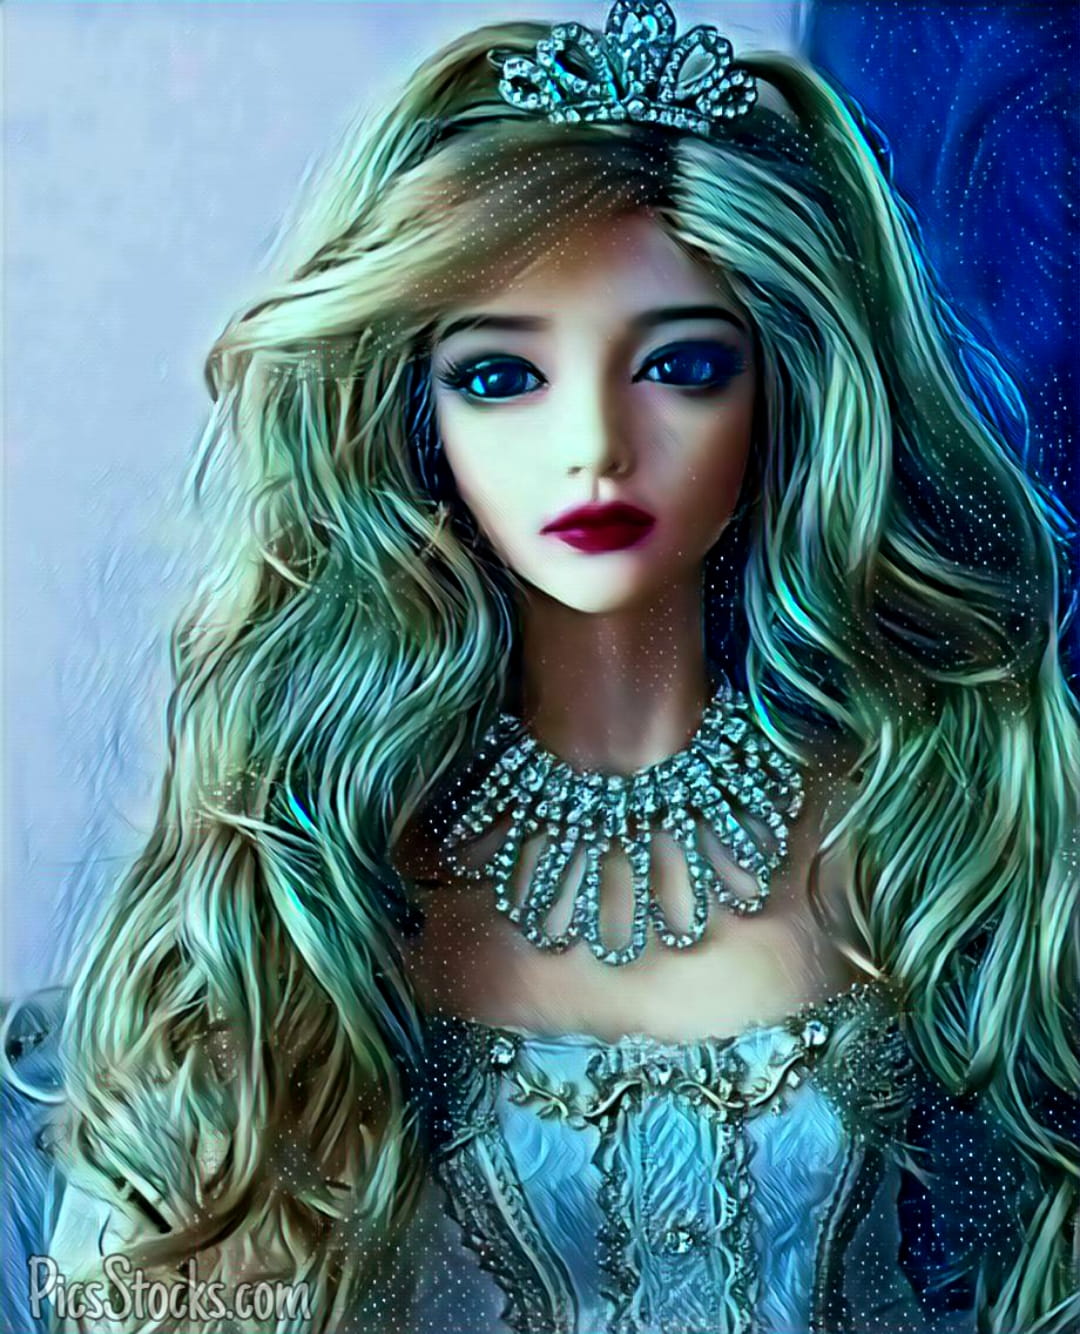 Barbie Doll Images Free Download ,barbie Doll Wallpapers - Whatsapp Dp Doll  Images Hd - 1080x1334 Wallpaper 